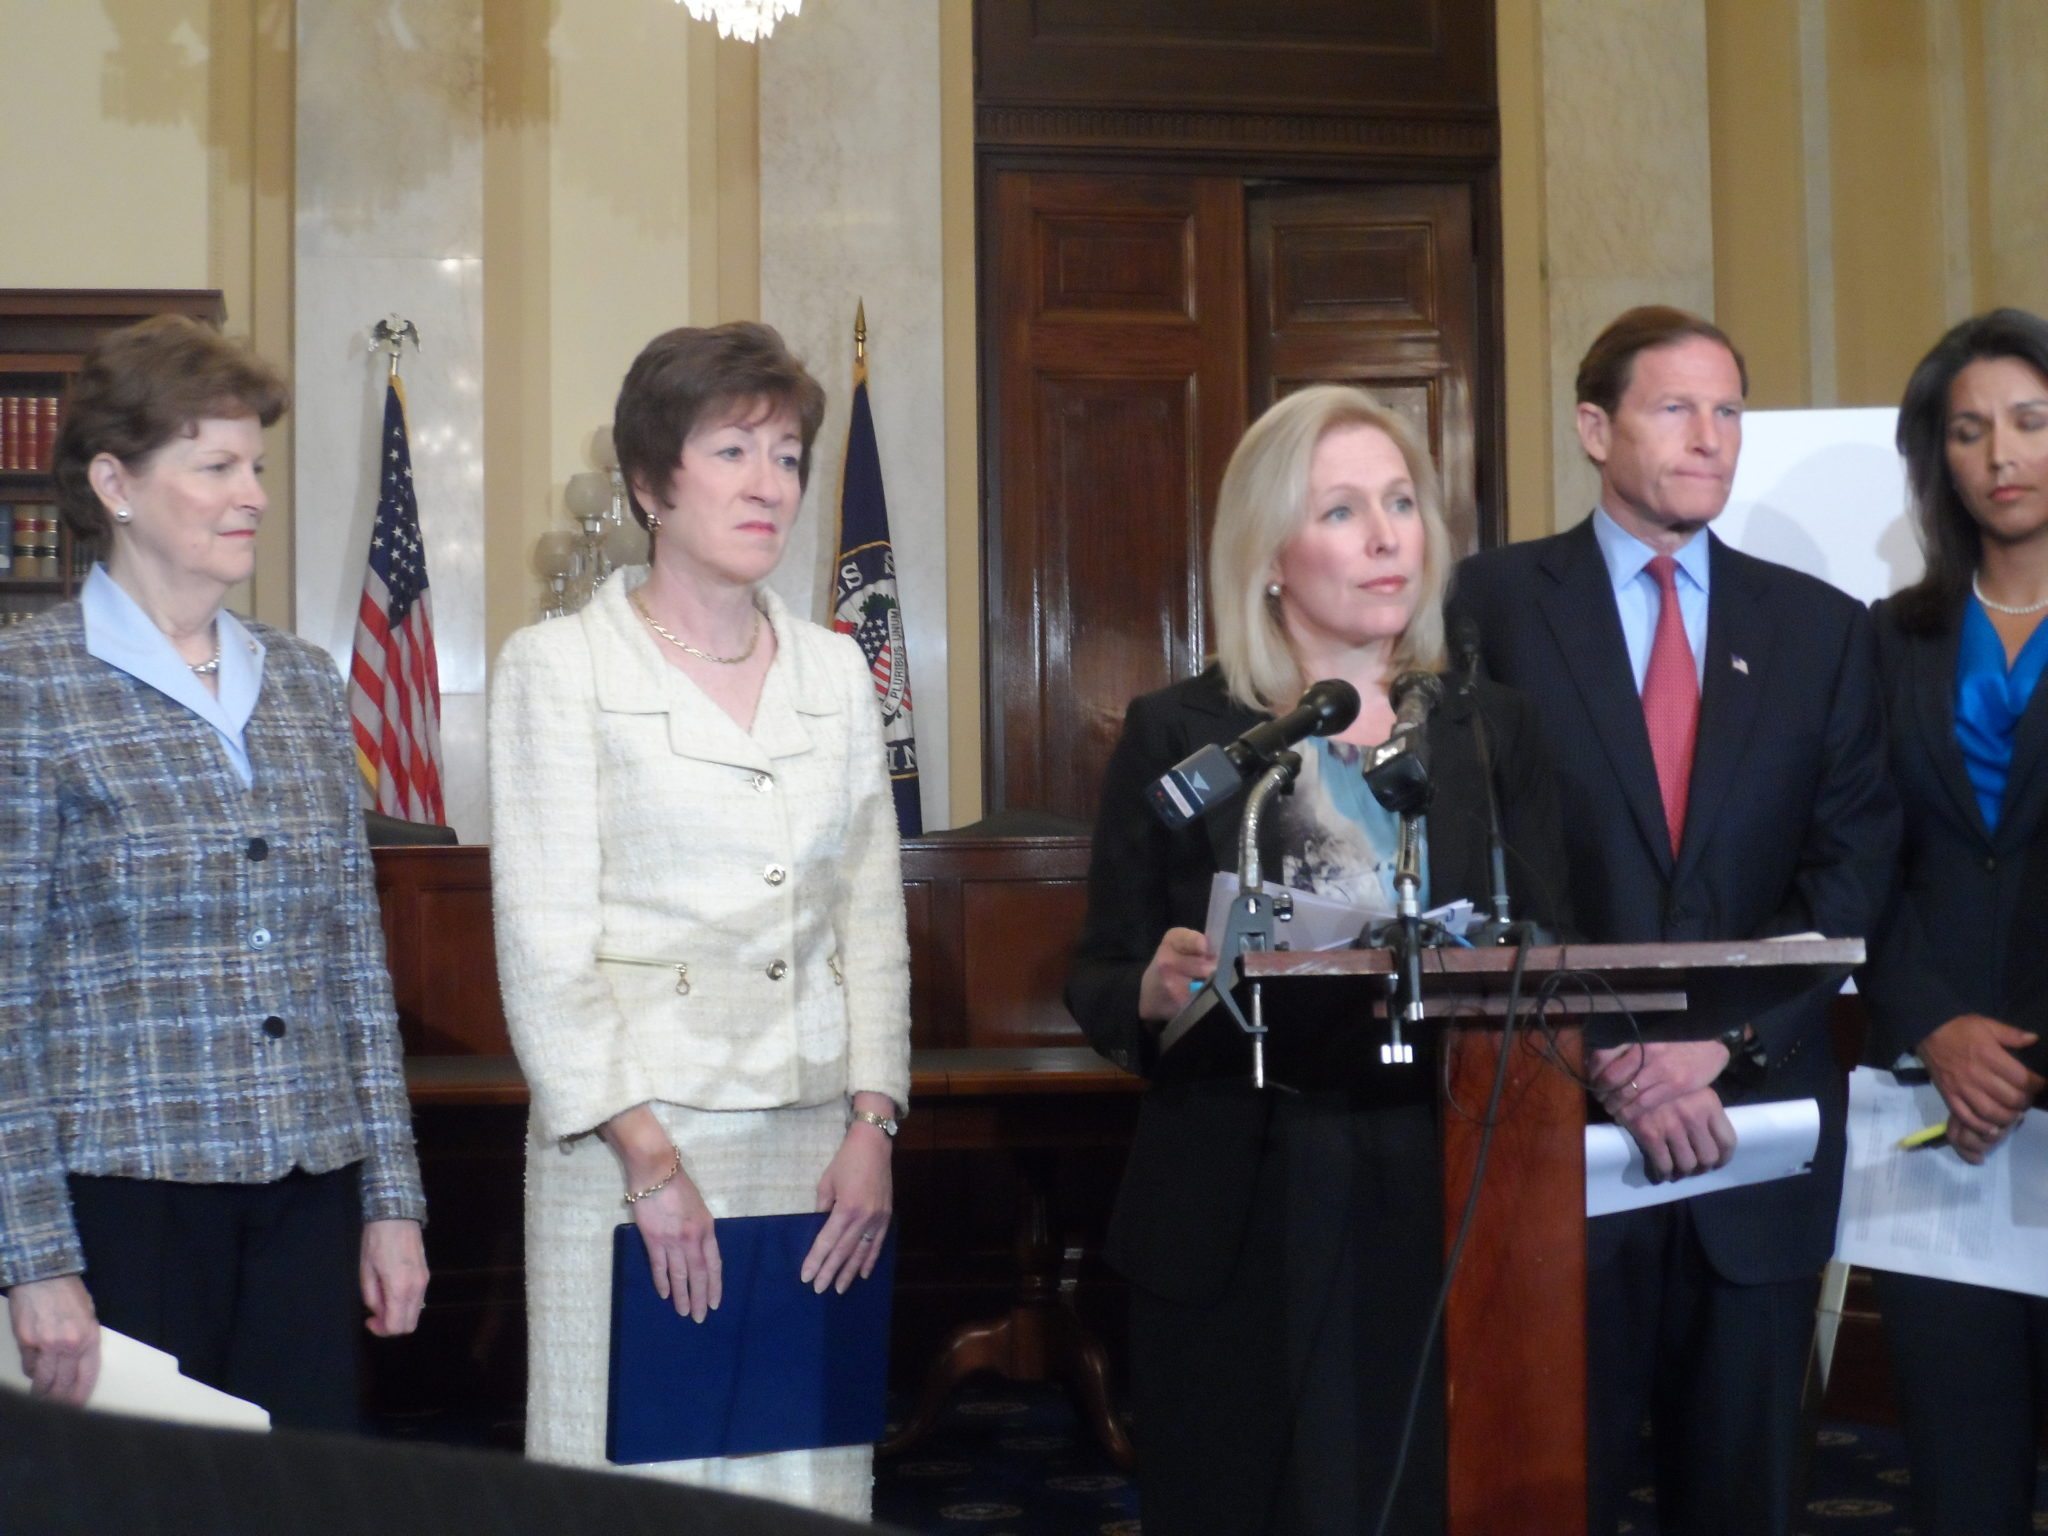 At a press conference on Capitol Hill, Sen. Kirsten Gillibrand demonstrated bipartisan support for her proposal to remove the reporting and prosecution of sexual assault complaints in the from the chain of command.